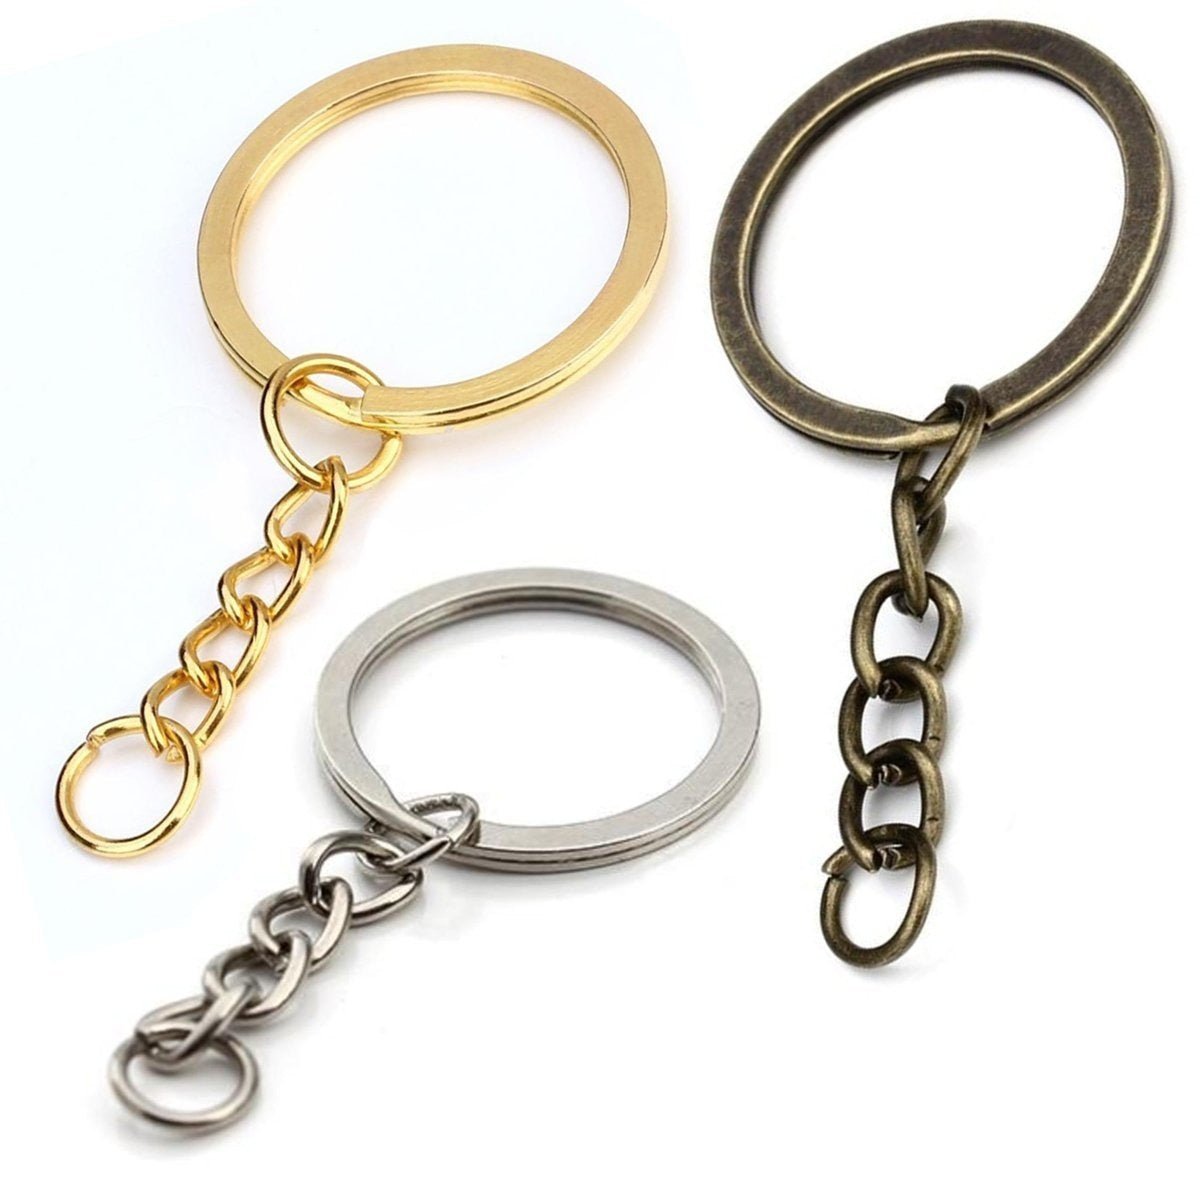 20pcs 28mm Gold Ancient Keyring Keychain Split Ring Chain Key Rings Key Chains - Antique Bronze - - Asia Sell